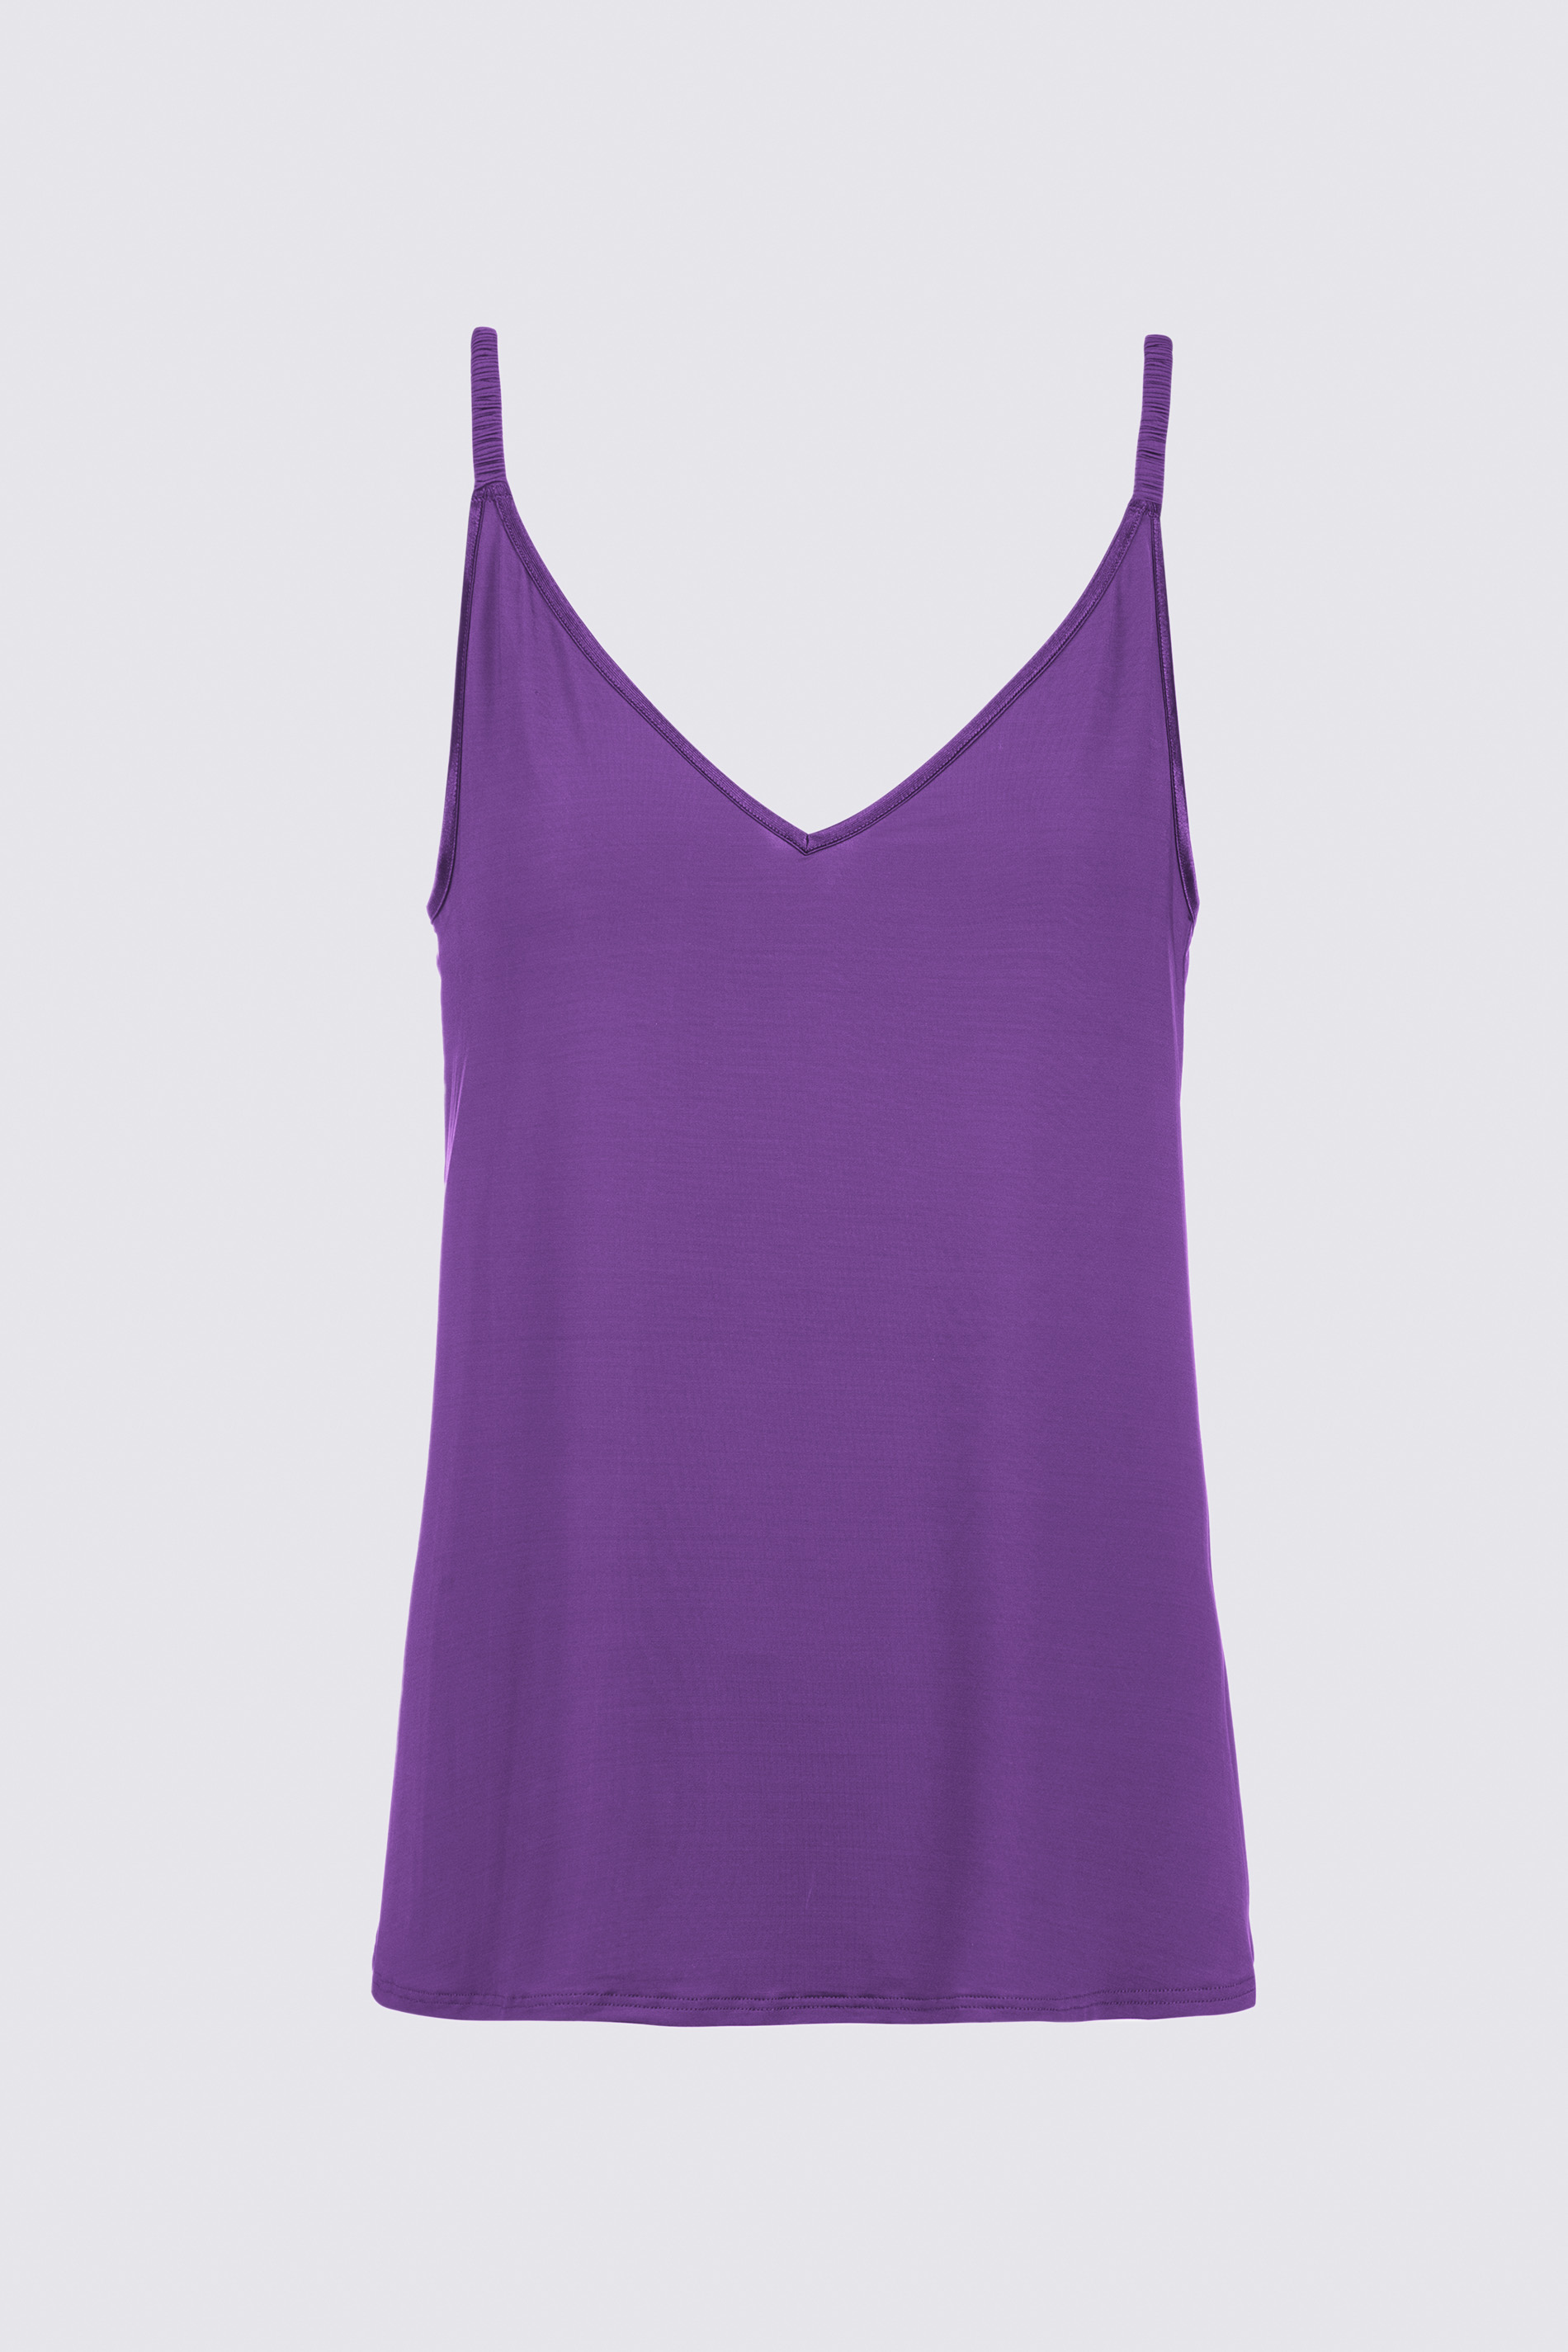 Camisole Fresh Plum Serie Poetry Classy Uitknippen | mey®